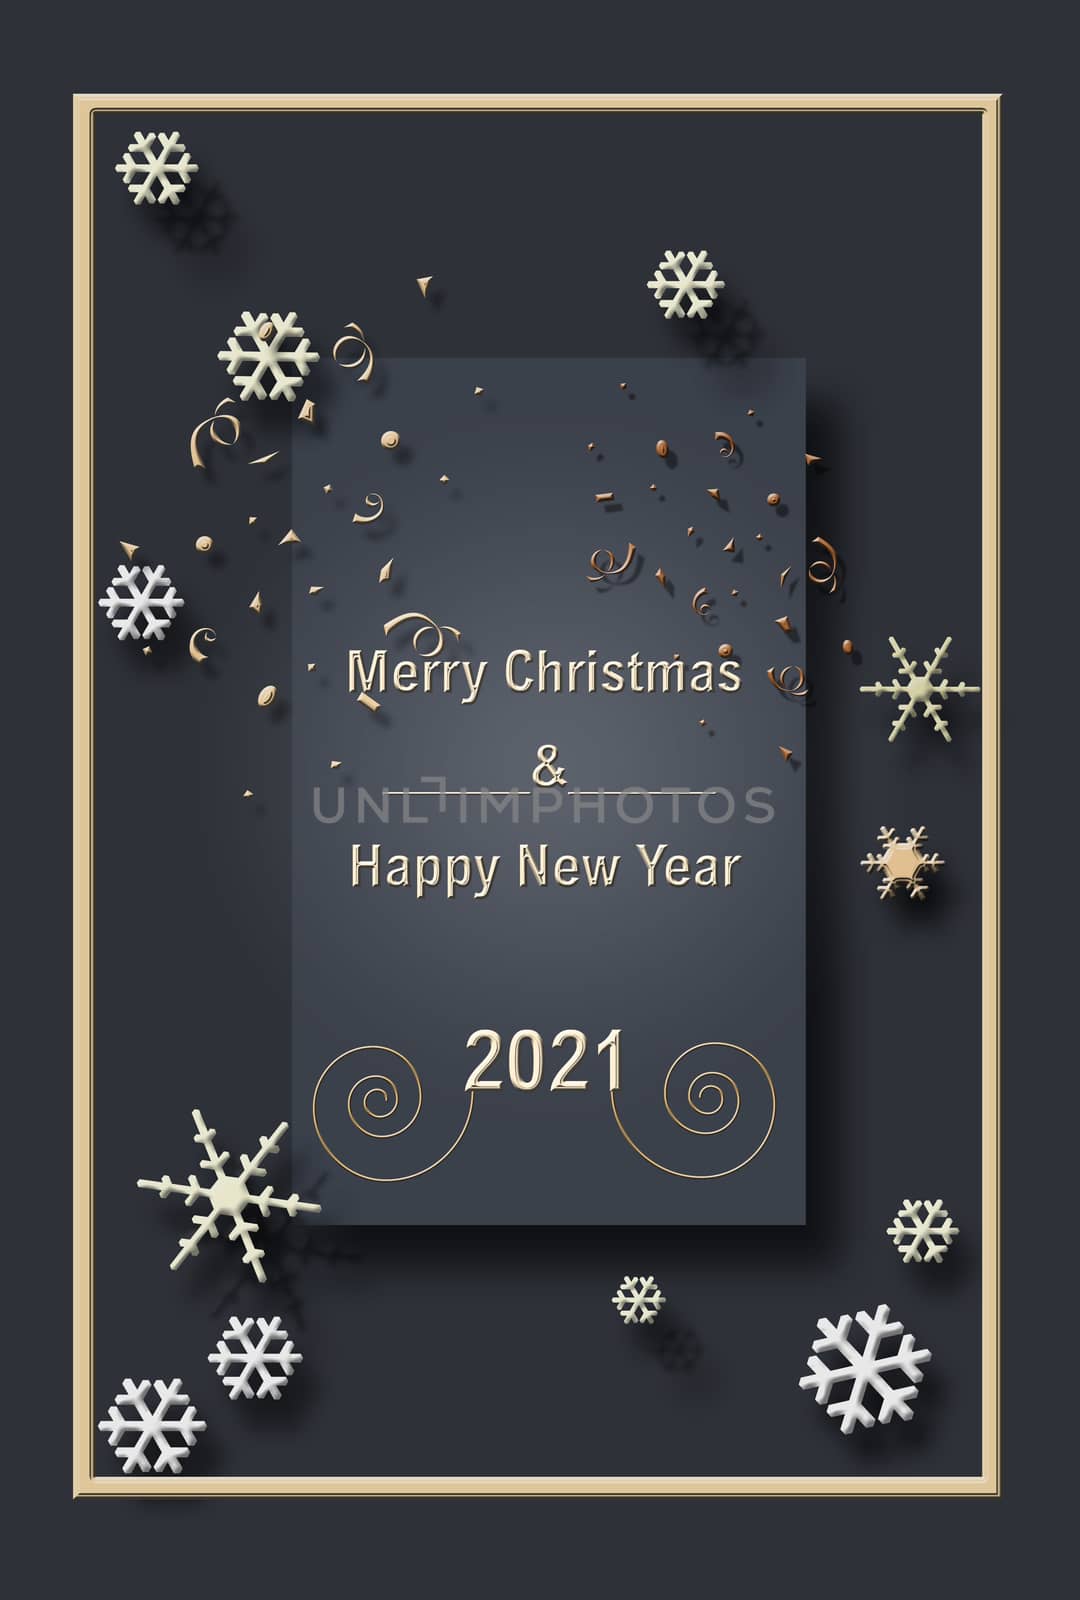 Luxury Elegant Merry Christmas and 2021 Happy New Year Poster Template with Shining Gold Snowflakes on grey black 3D background. Snowflake frame and sparkles. Illustration.